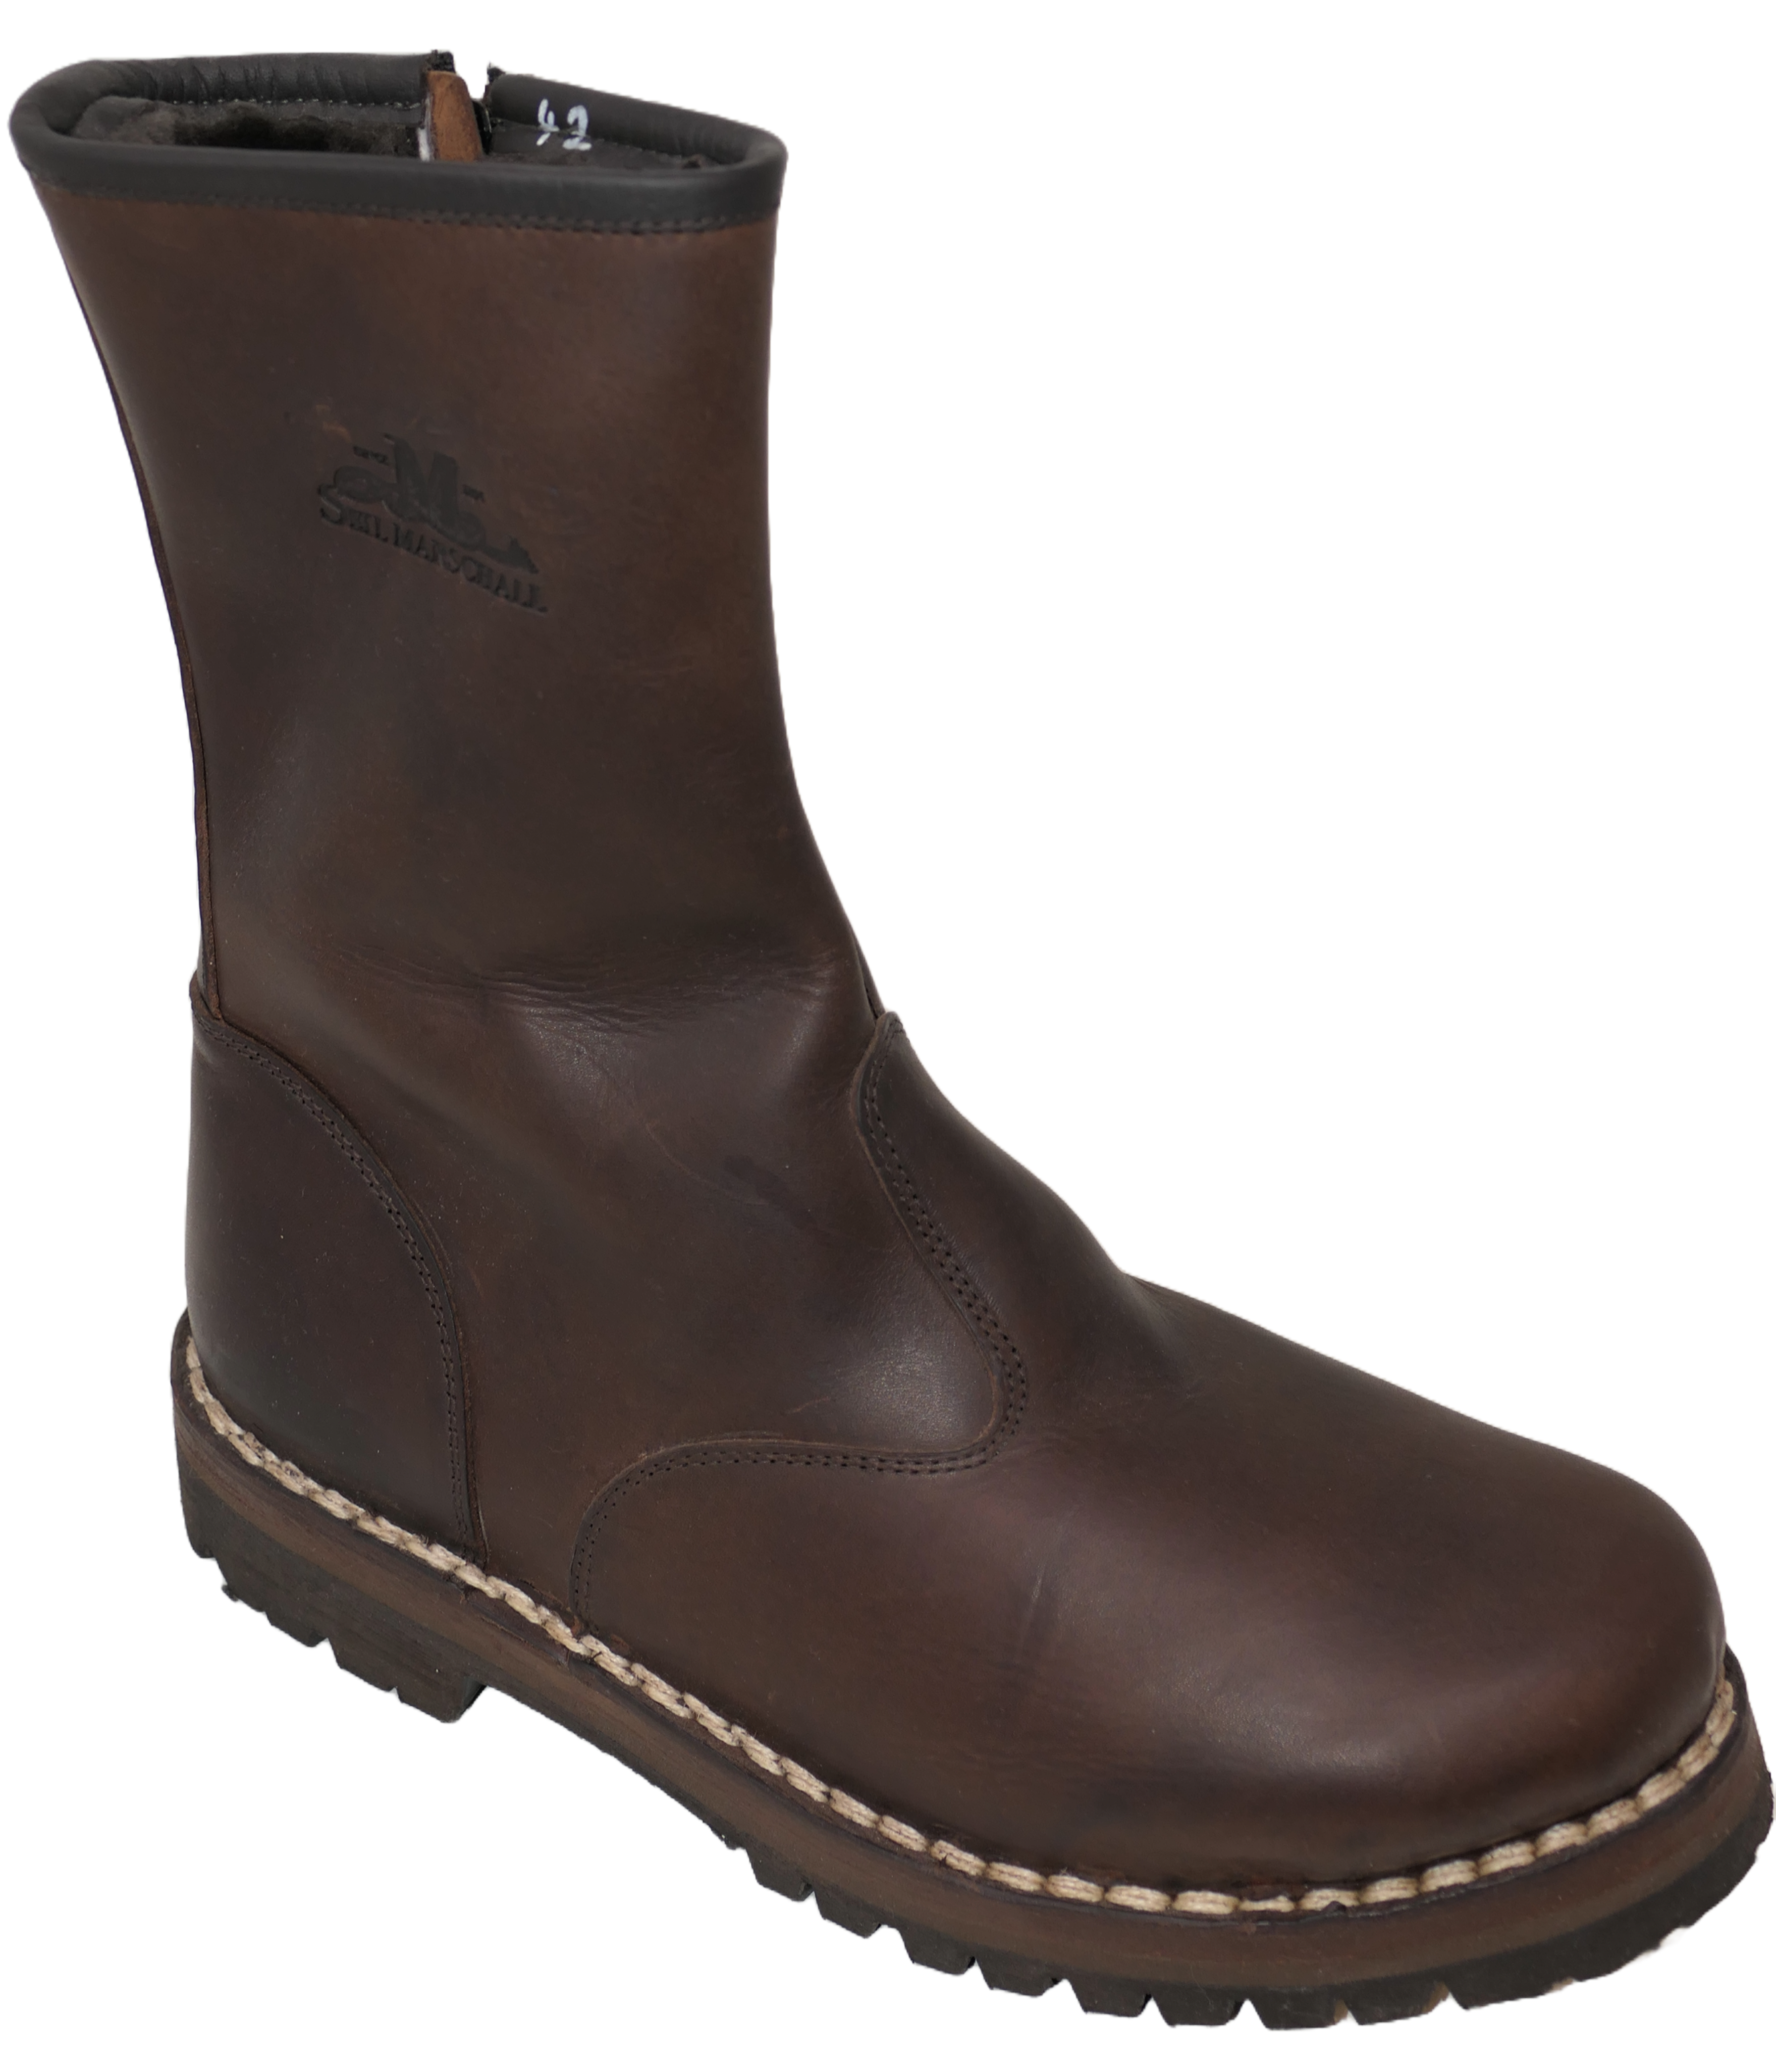 Anchorage Winterboot